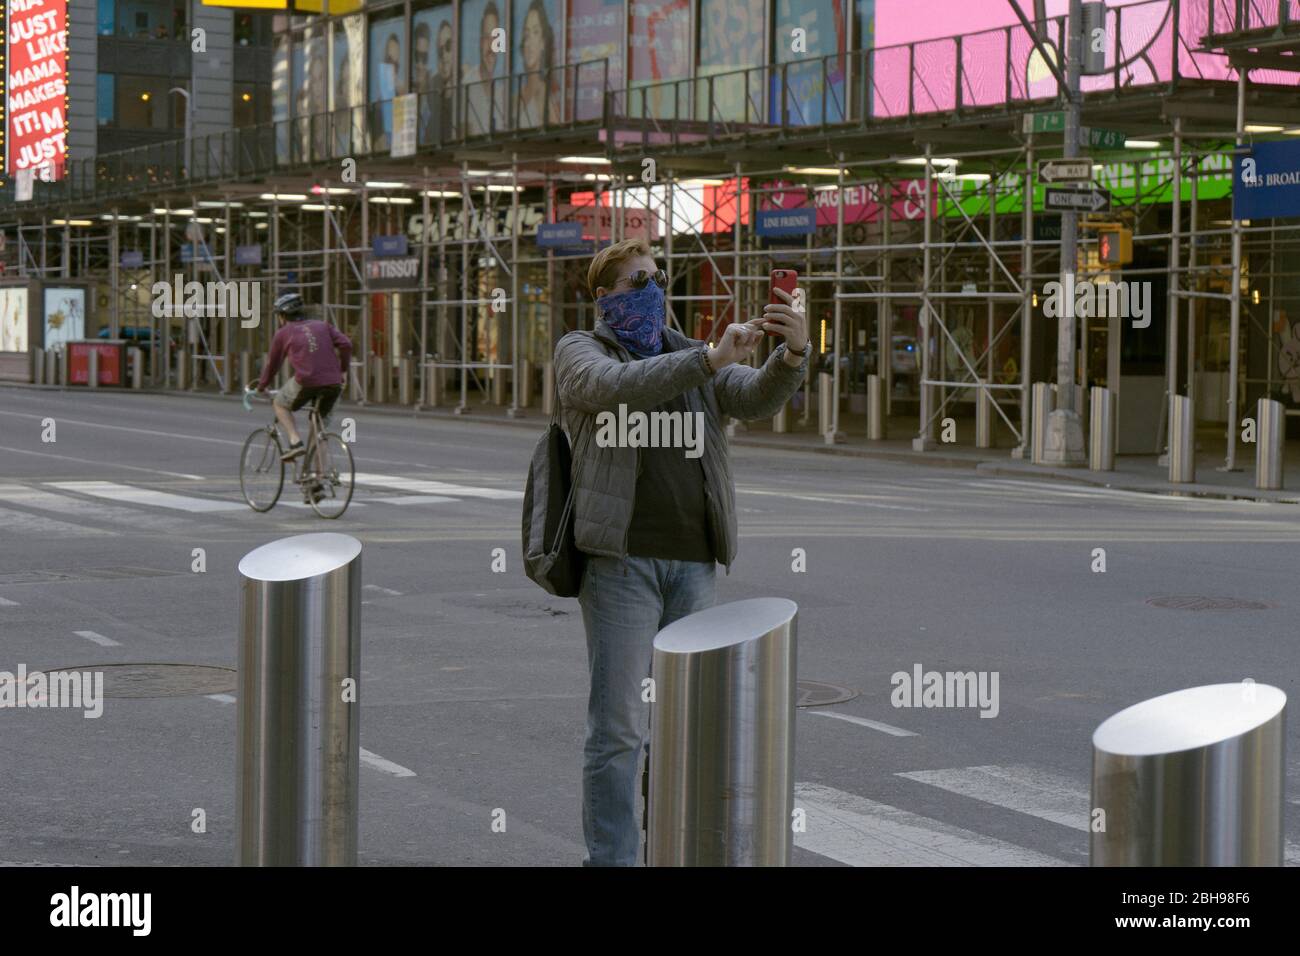 Middle aged man taking a selfie on a deserted street in Times Square Stock Photo